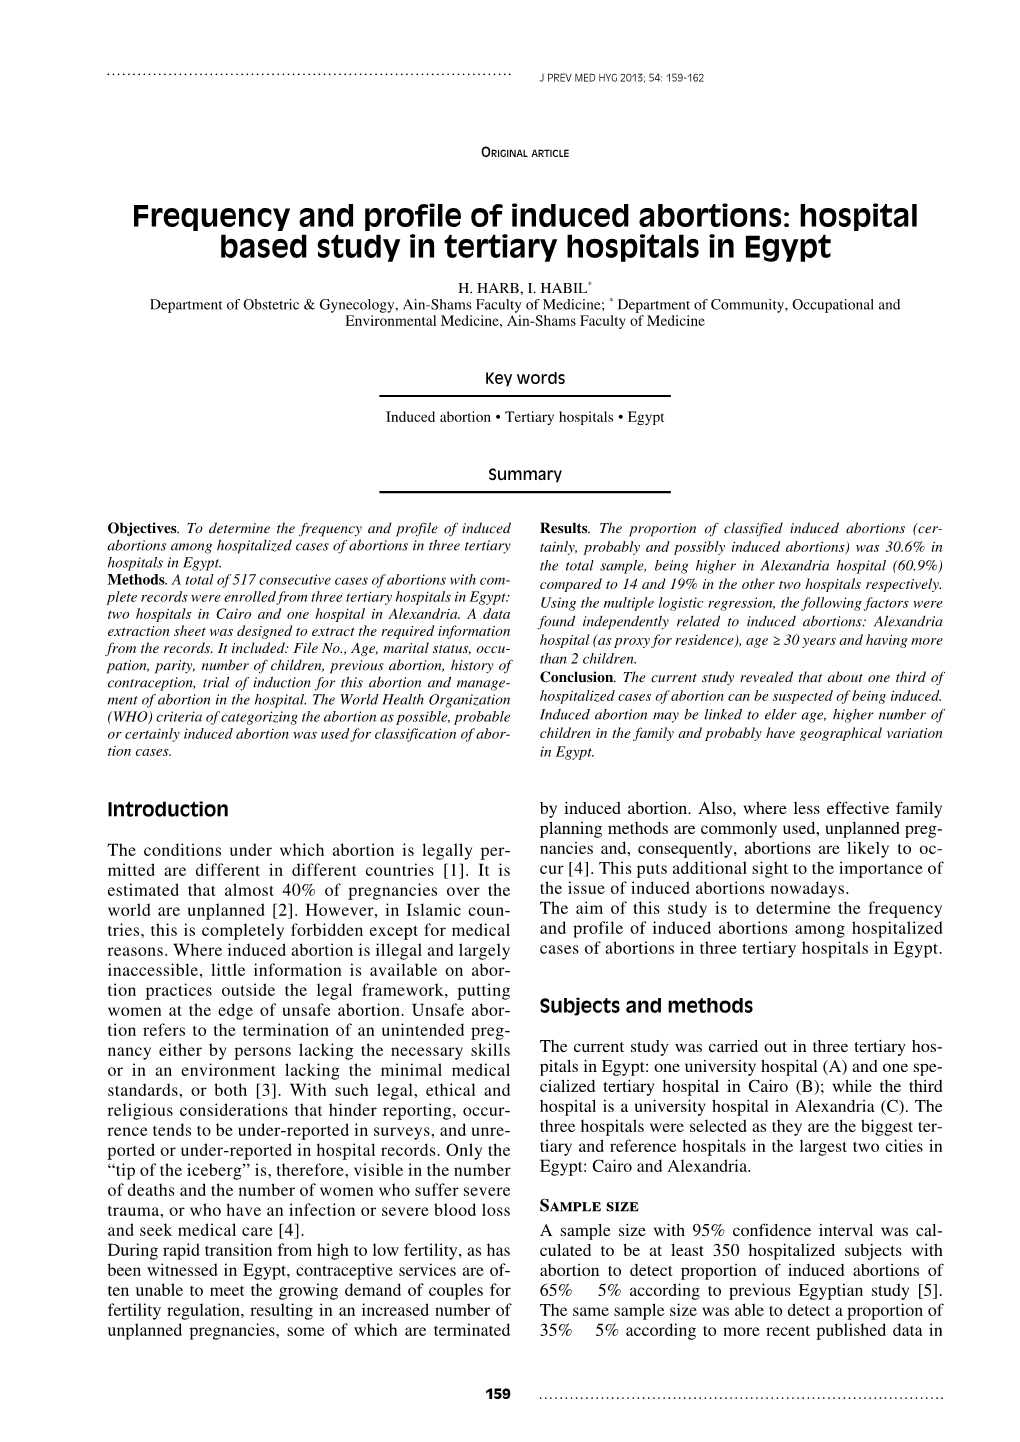 Frequency and Profile of Induced Abortions: Hospital Based Study in Tertiary Hospitals in Egypt